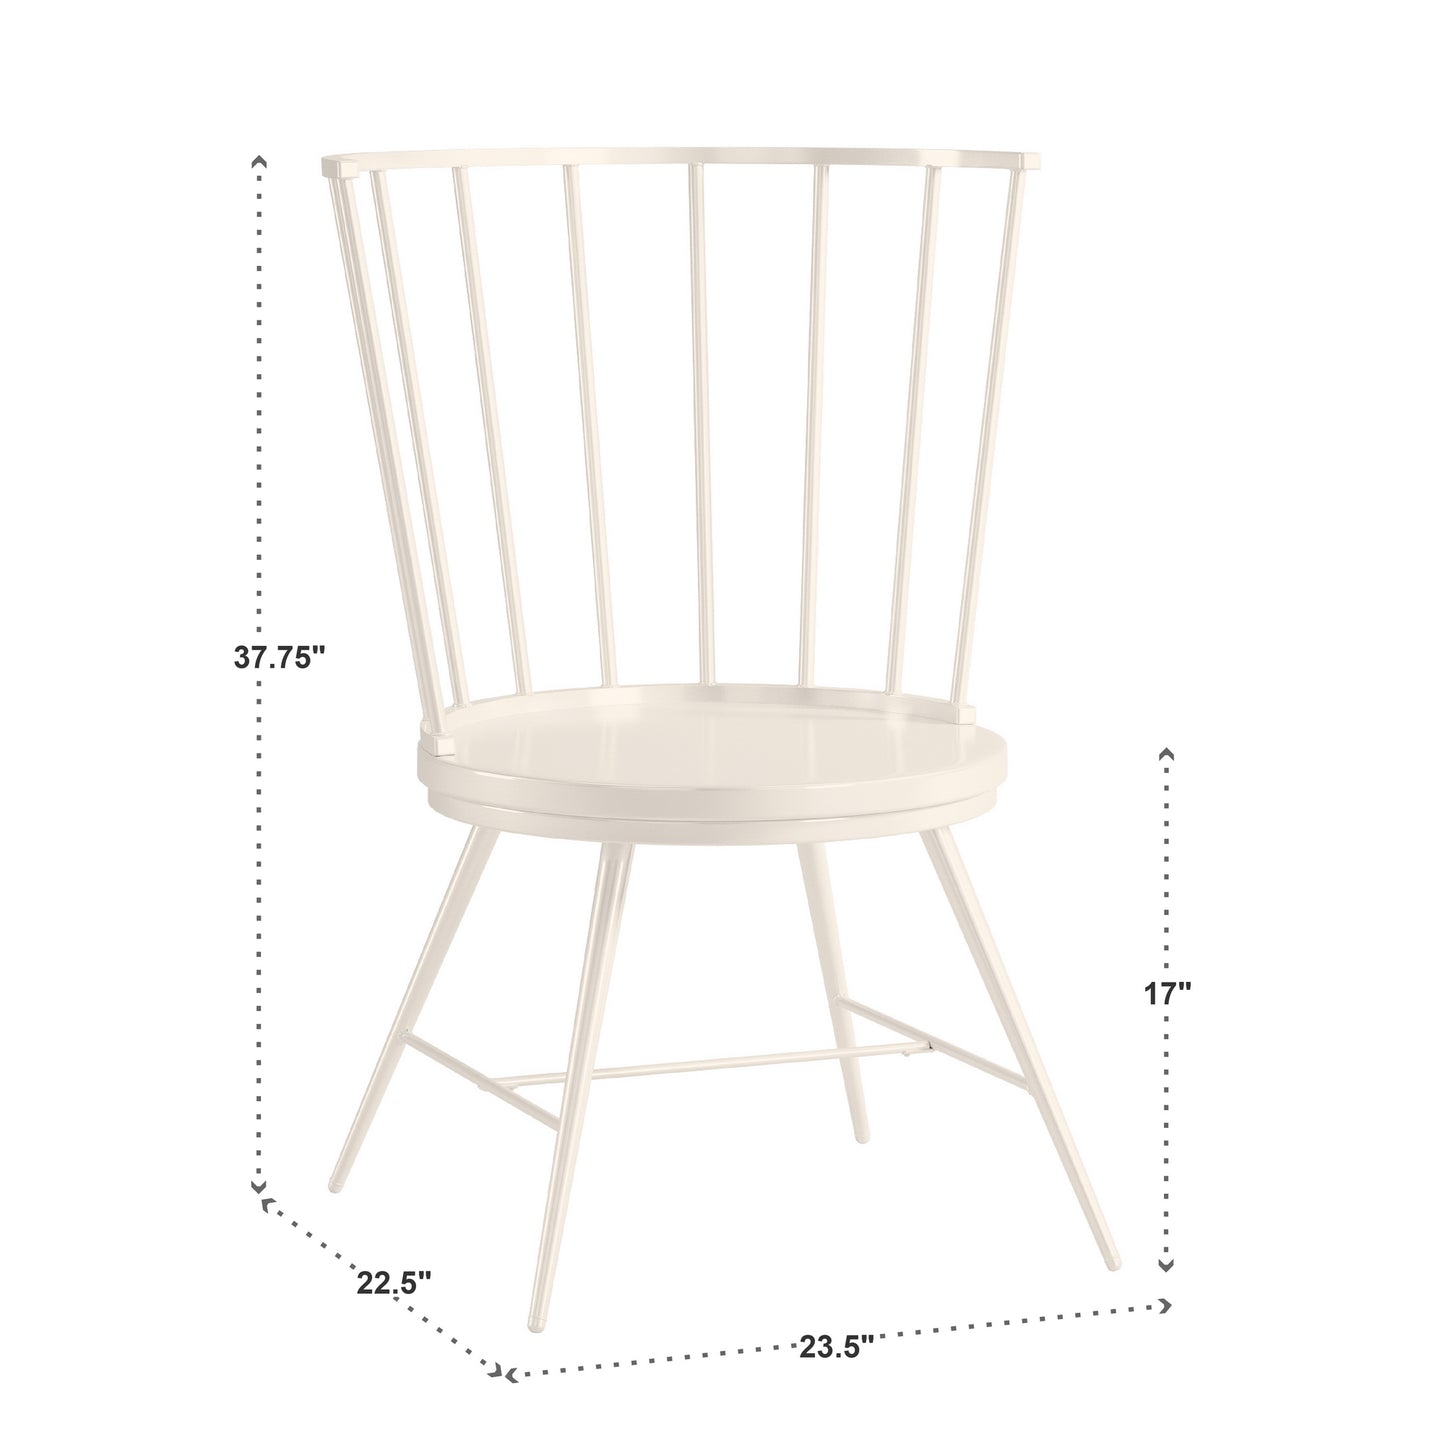 High Back Windsor Classic Dining Chairs (Set of 2) - White